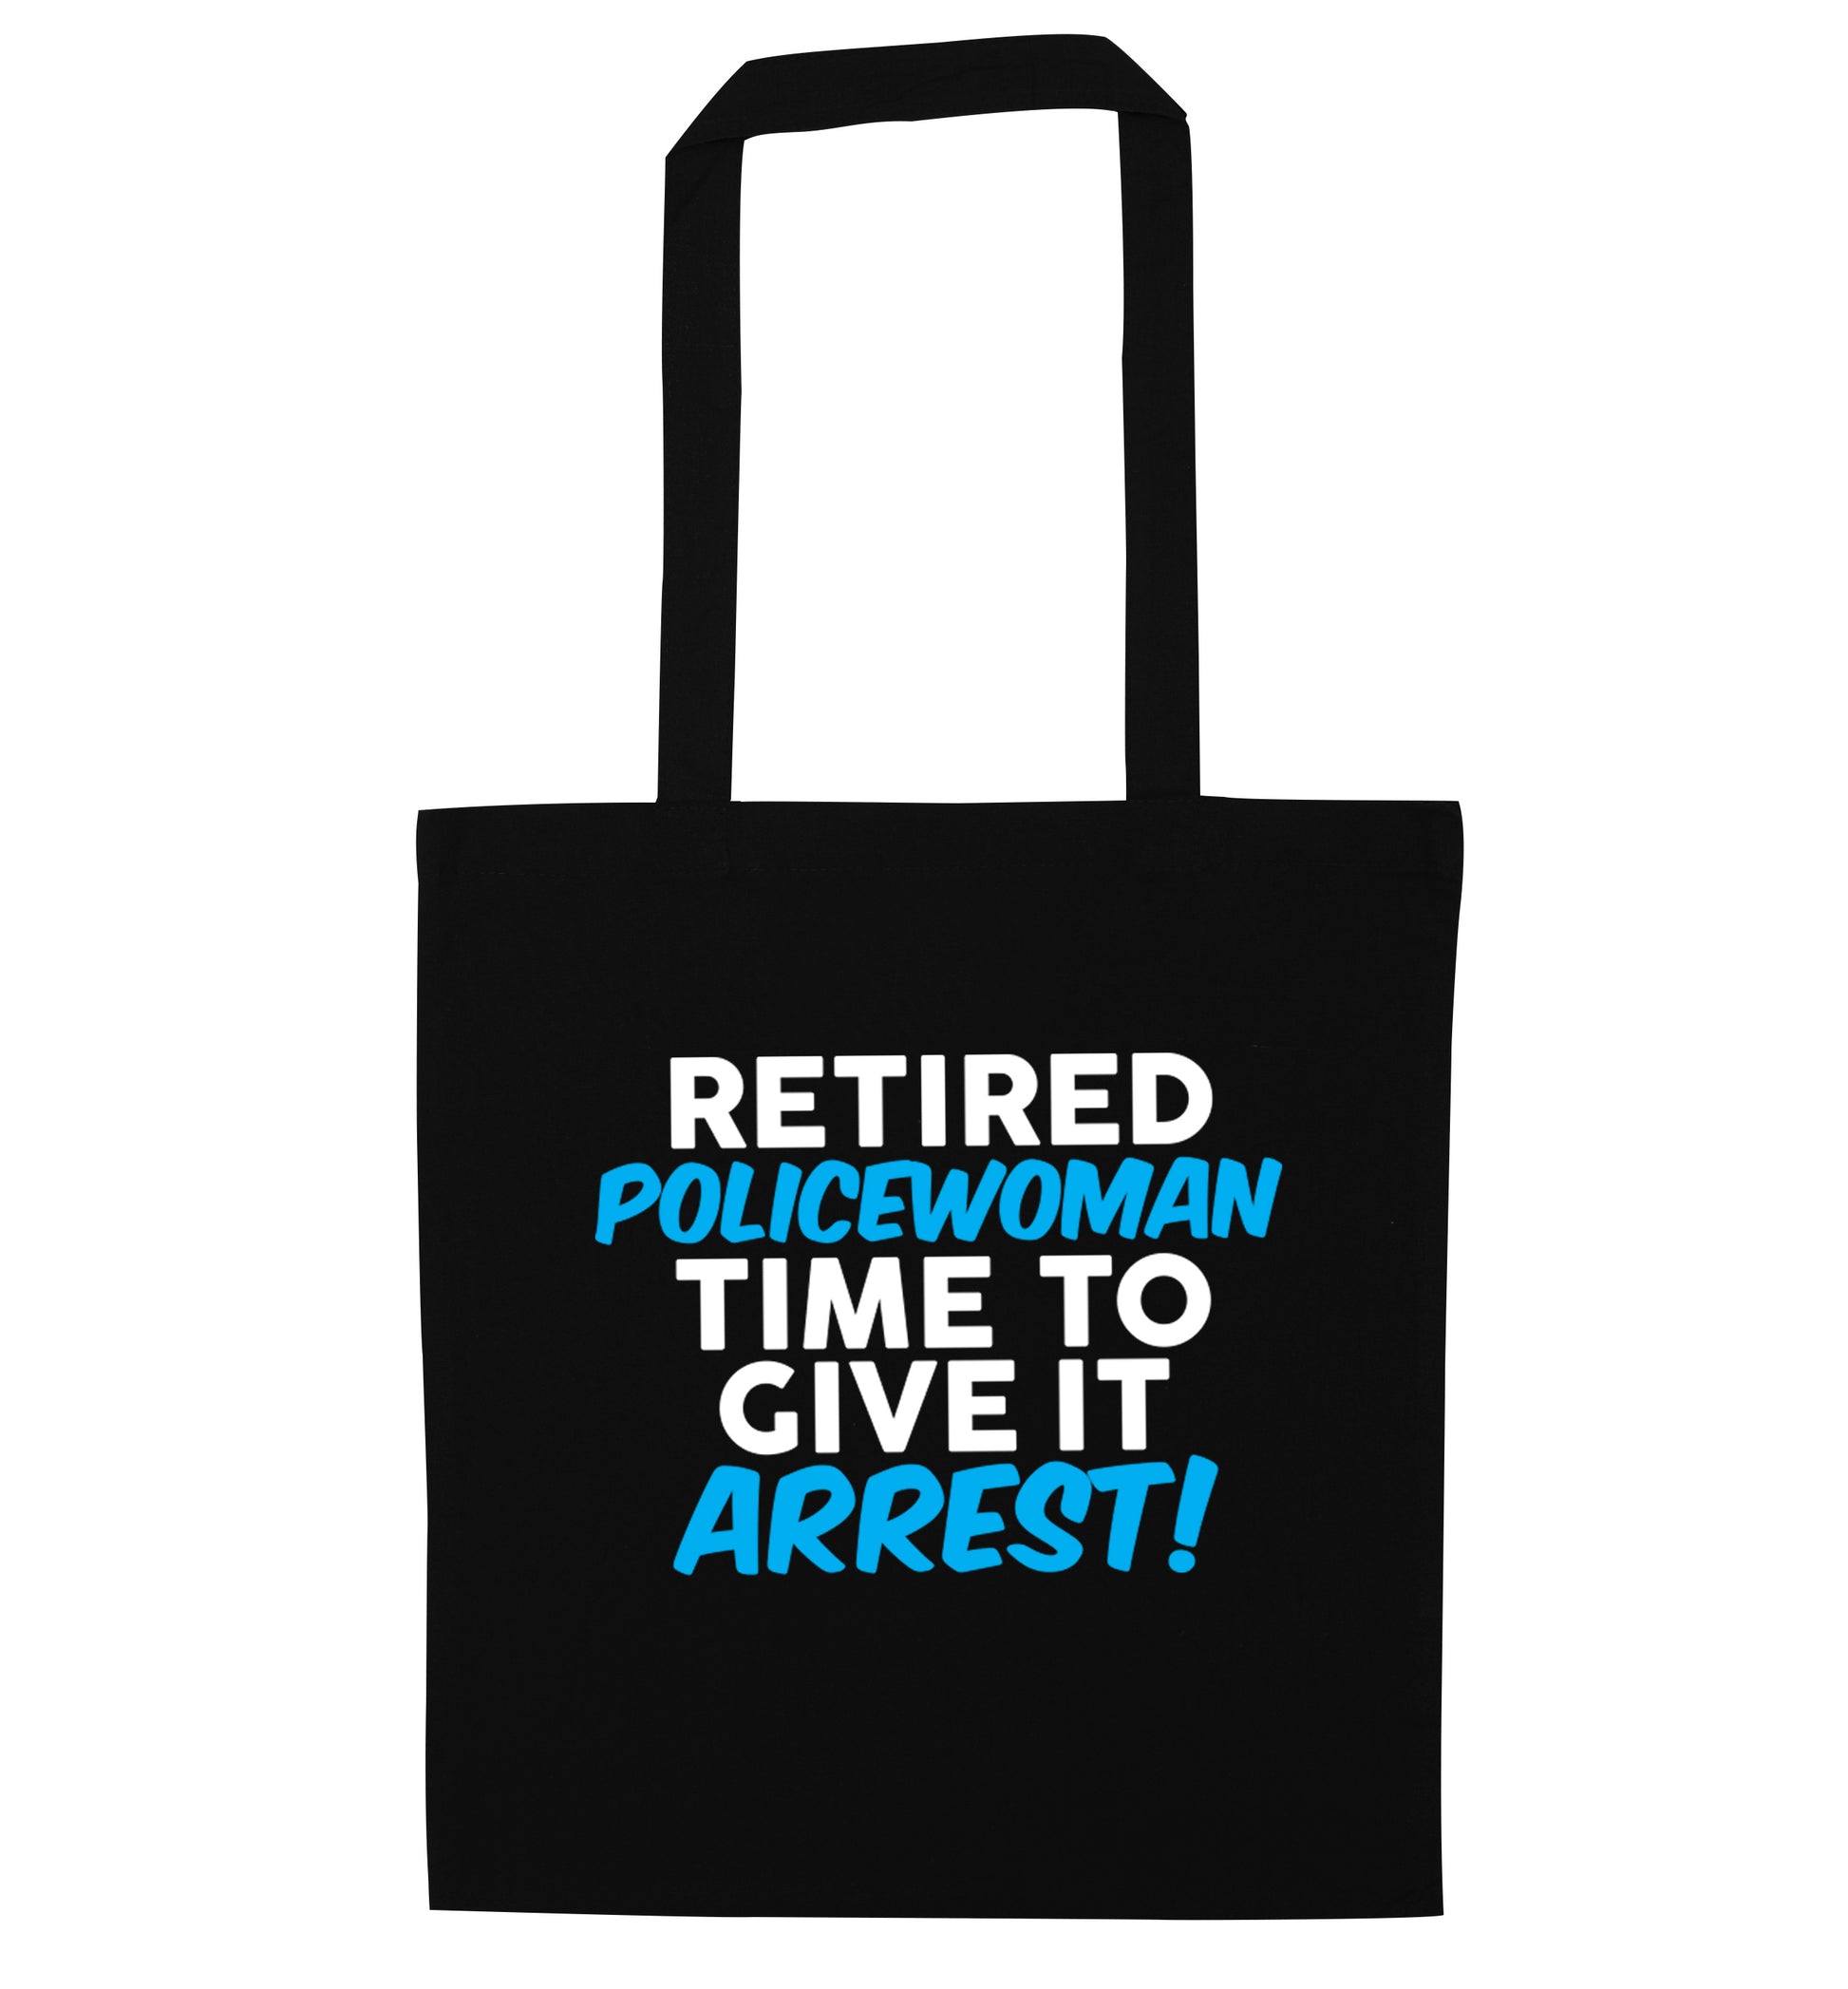 Retired policewoman time to give it arrest black tote bag